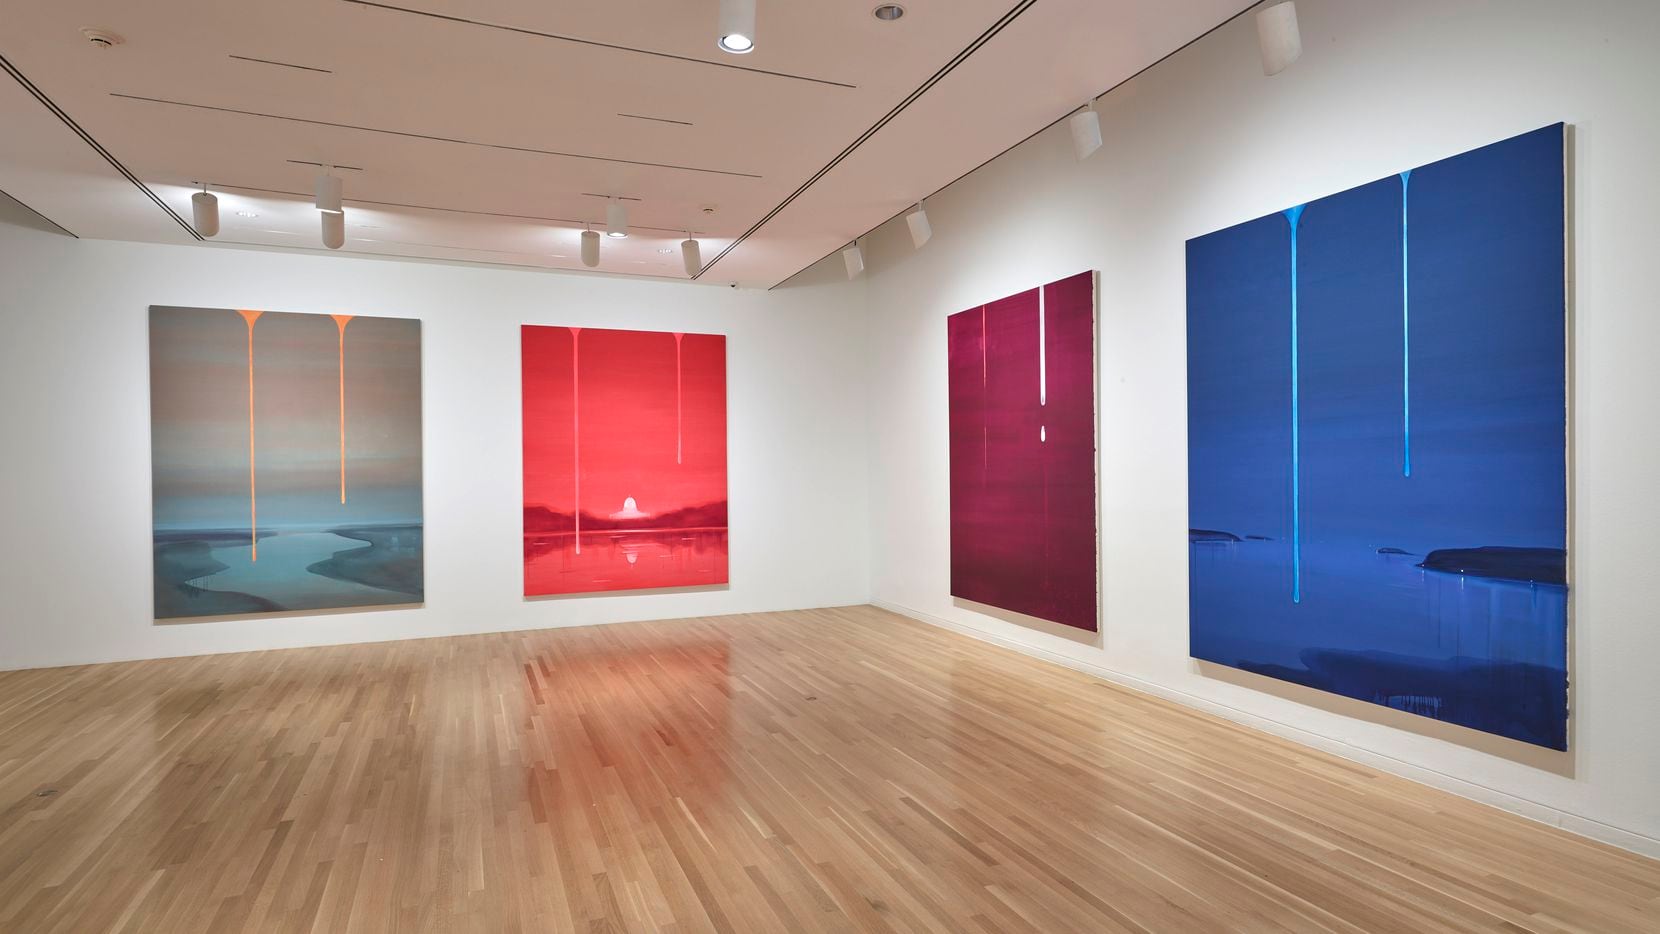 Wanda Koop painted all the works in her new Dallas Museum of Art exhibition especially for...